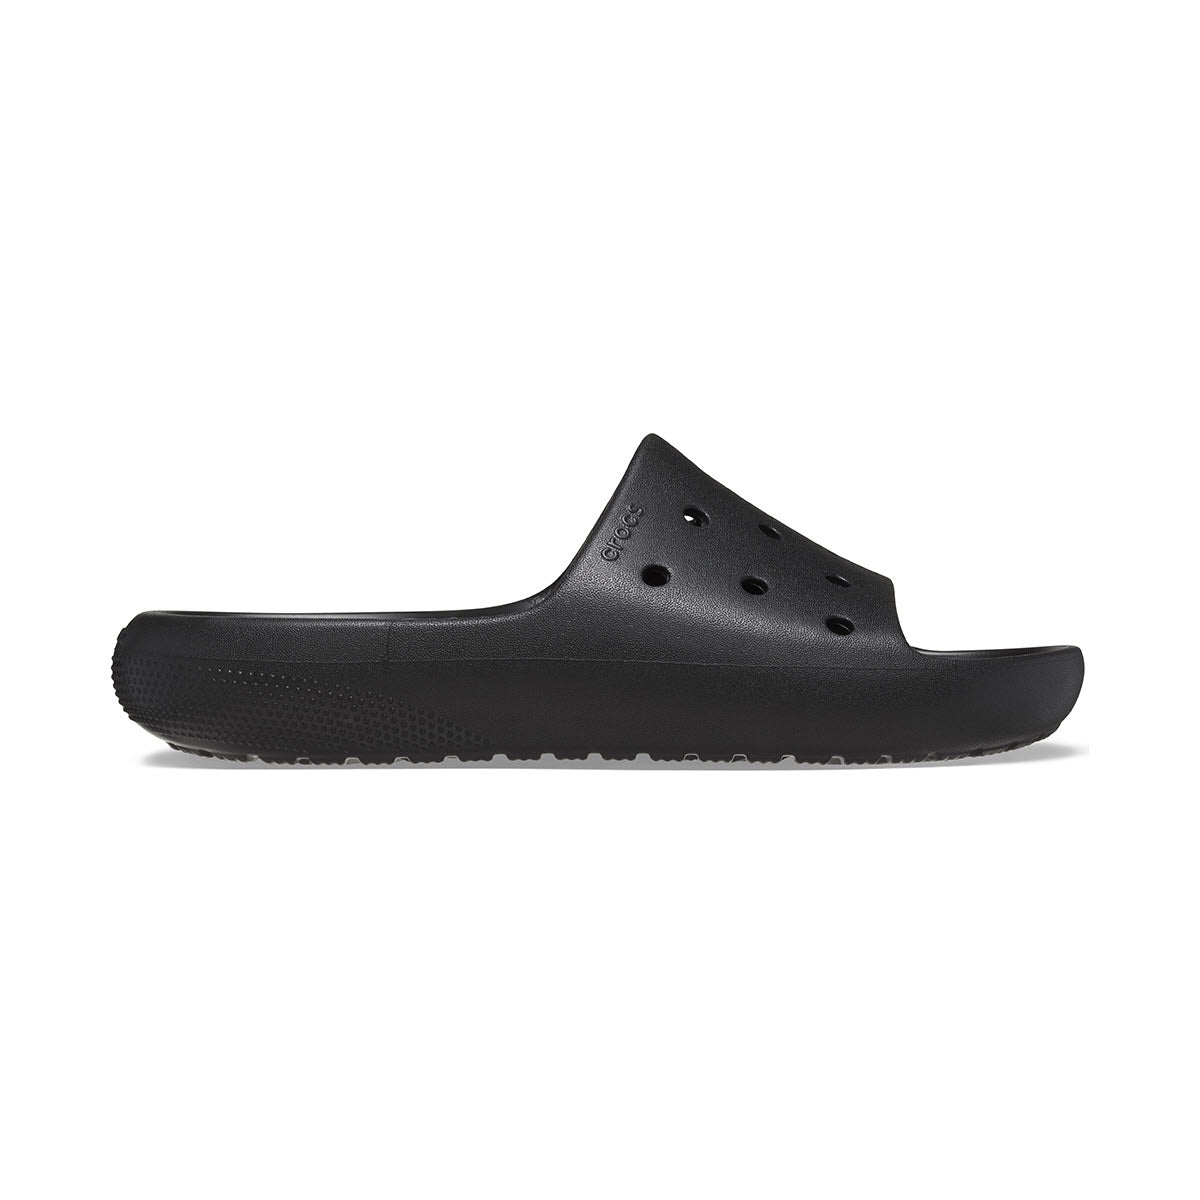 Side view of a black CROCS CLASSIC CROC SLIDE V2 SANDAL from the Crocs Collection with ventilation holes on the top and a textured sole.